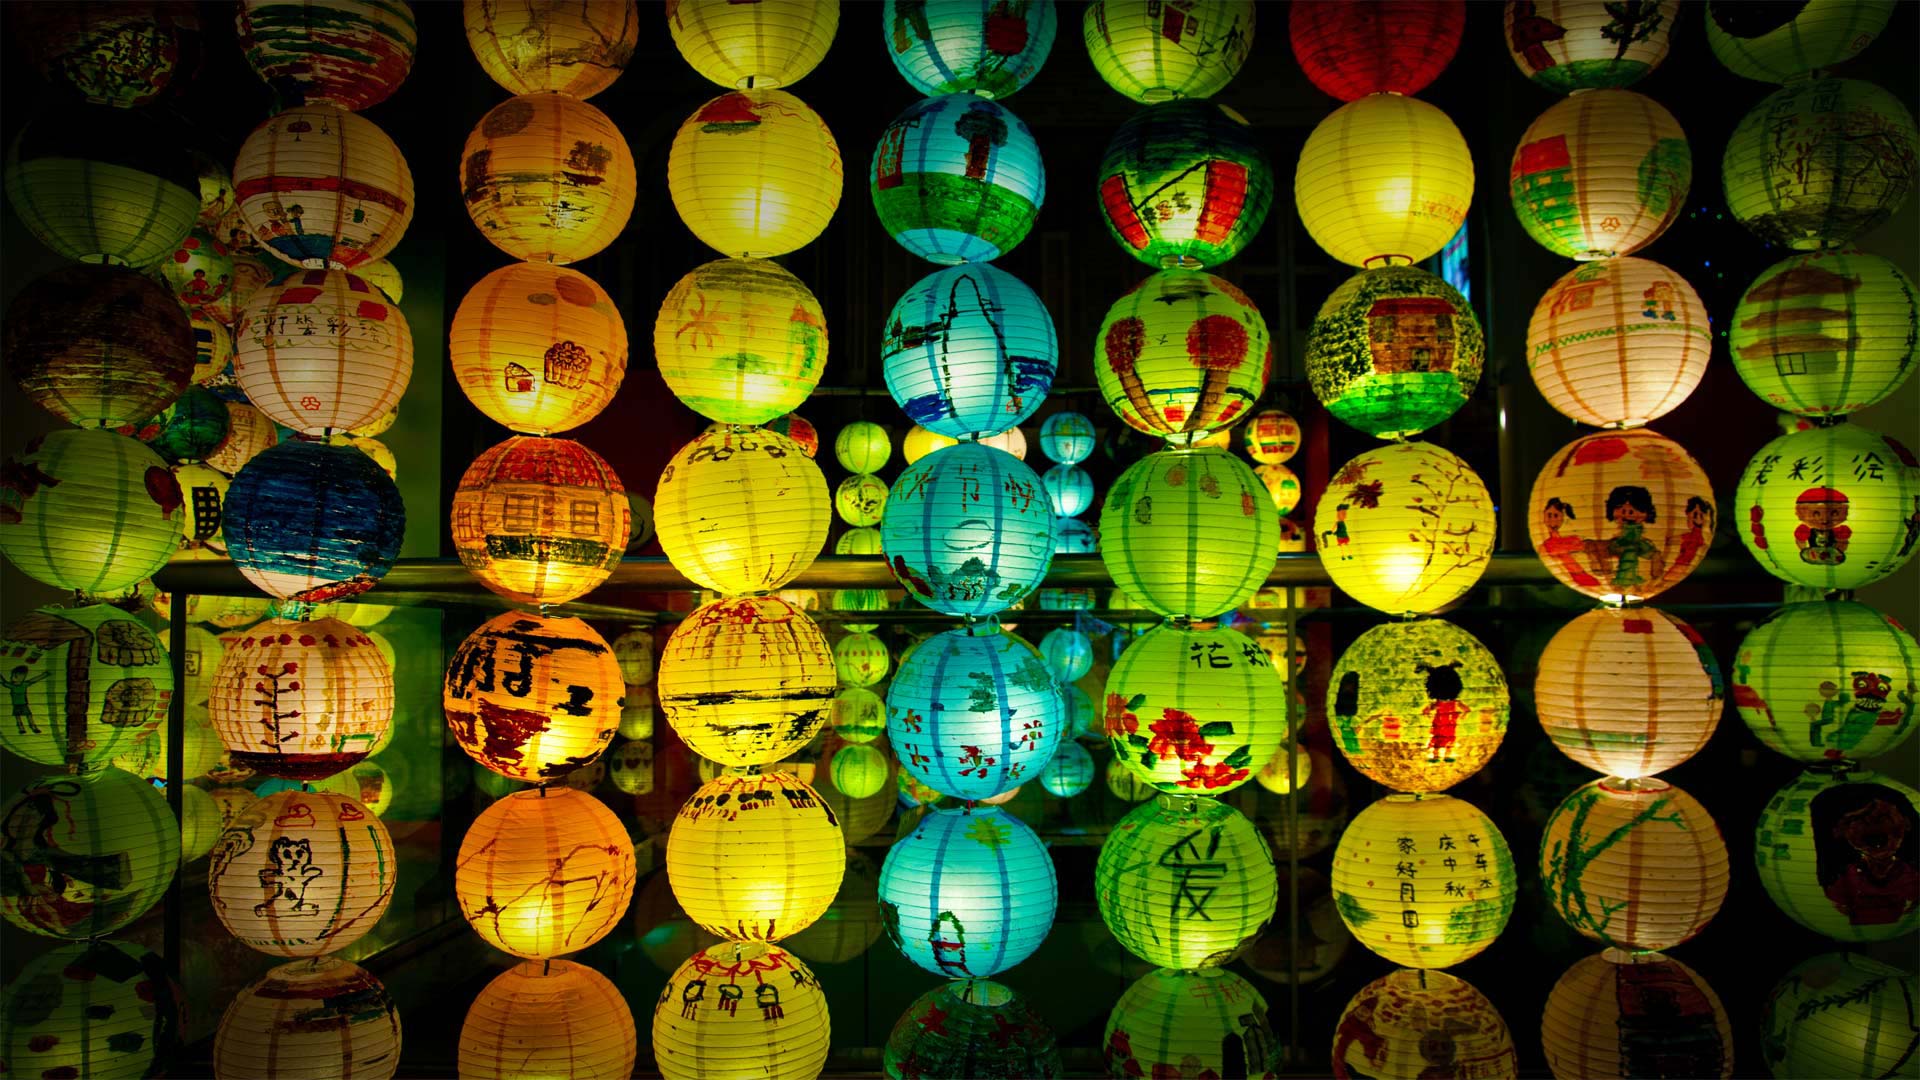 Lantern display celebrating the Mid-Autumn Festival in Singapore - Khin/Getty Images)